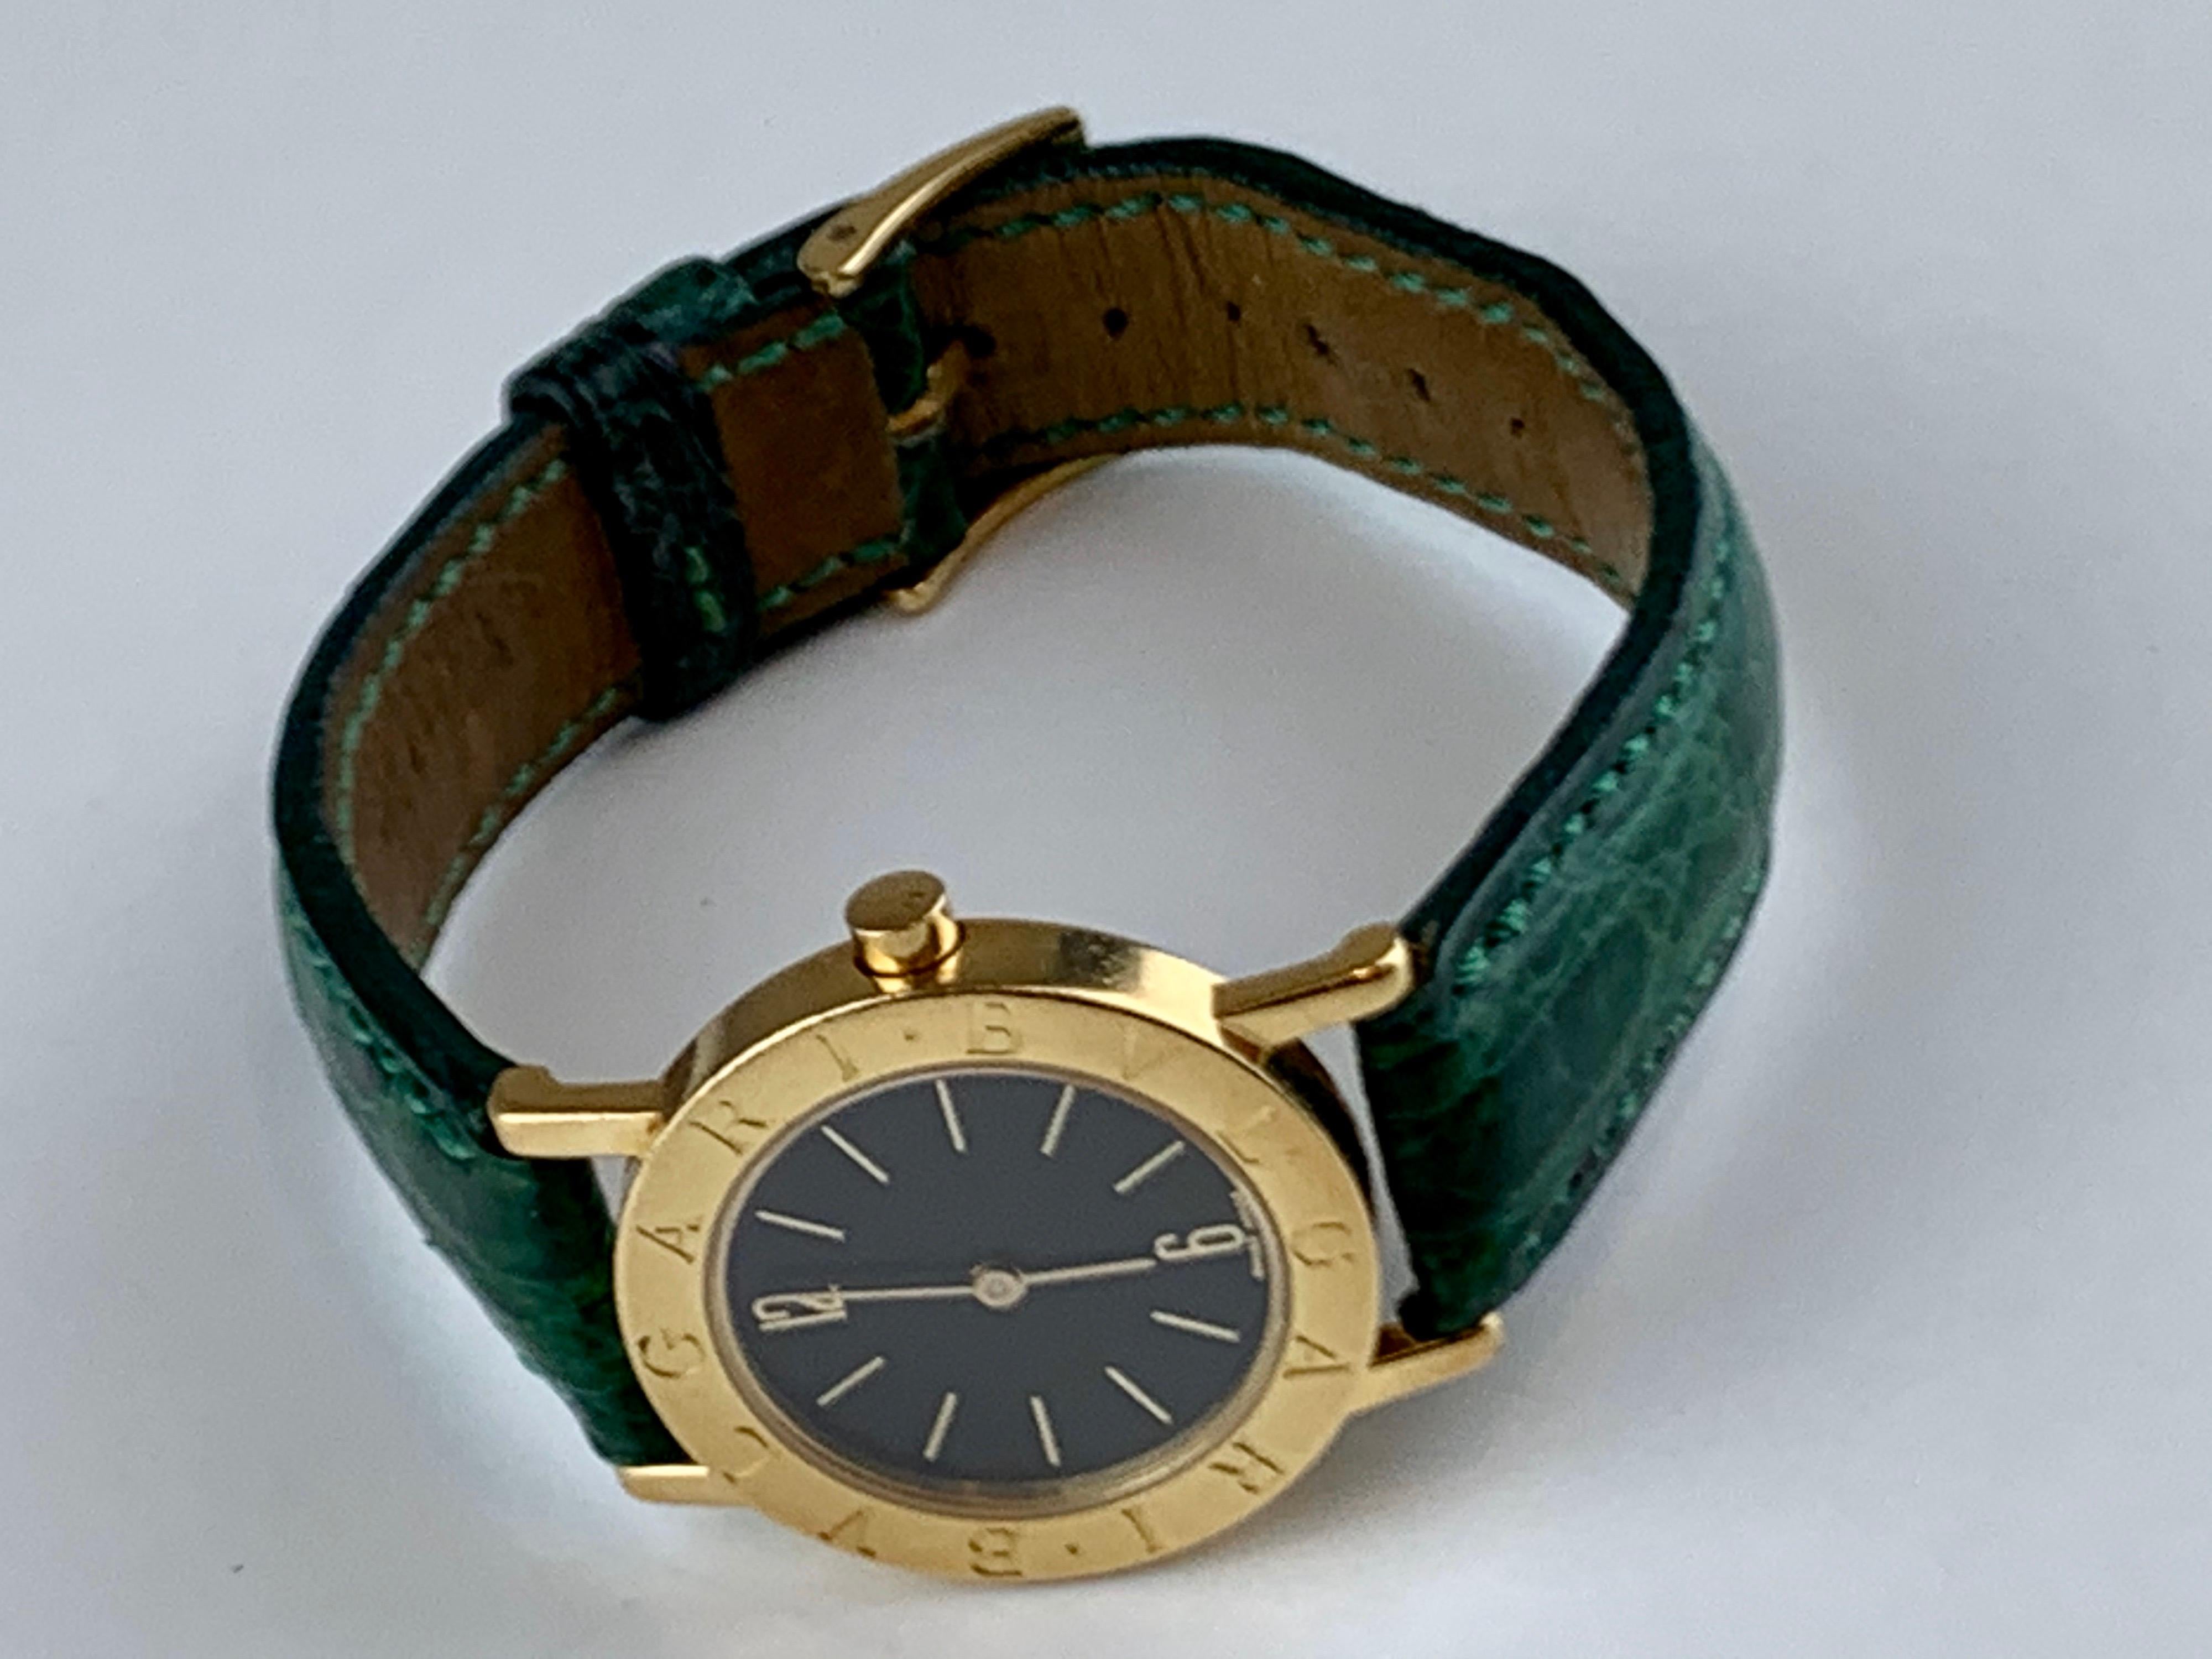 A Stylish Bvlgari Dress Watch Reference :BB 26 GL. 
This Lovely Great Value Bvlgari Dress Watch Is In Good Condition.  
Please Refer Pictures Are Of The Exact Watch Being Offered.
The Case Is Made Of A High-Polished Finished 18k Yellow Gold With A